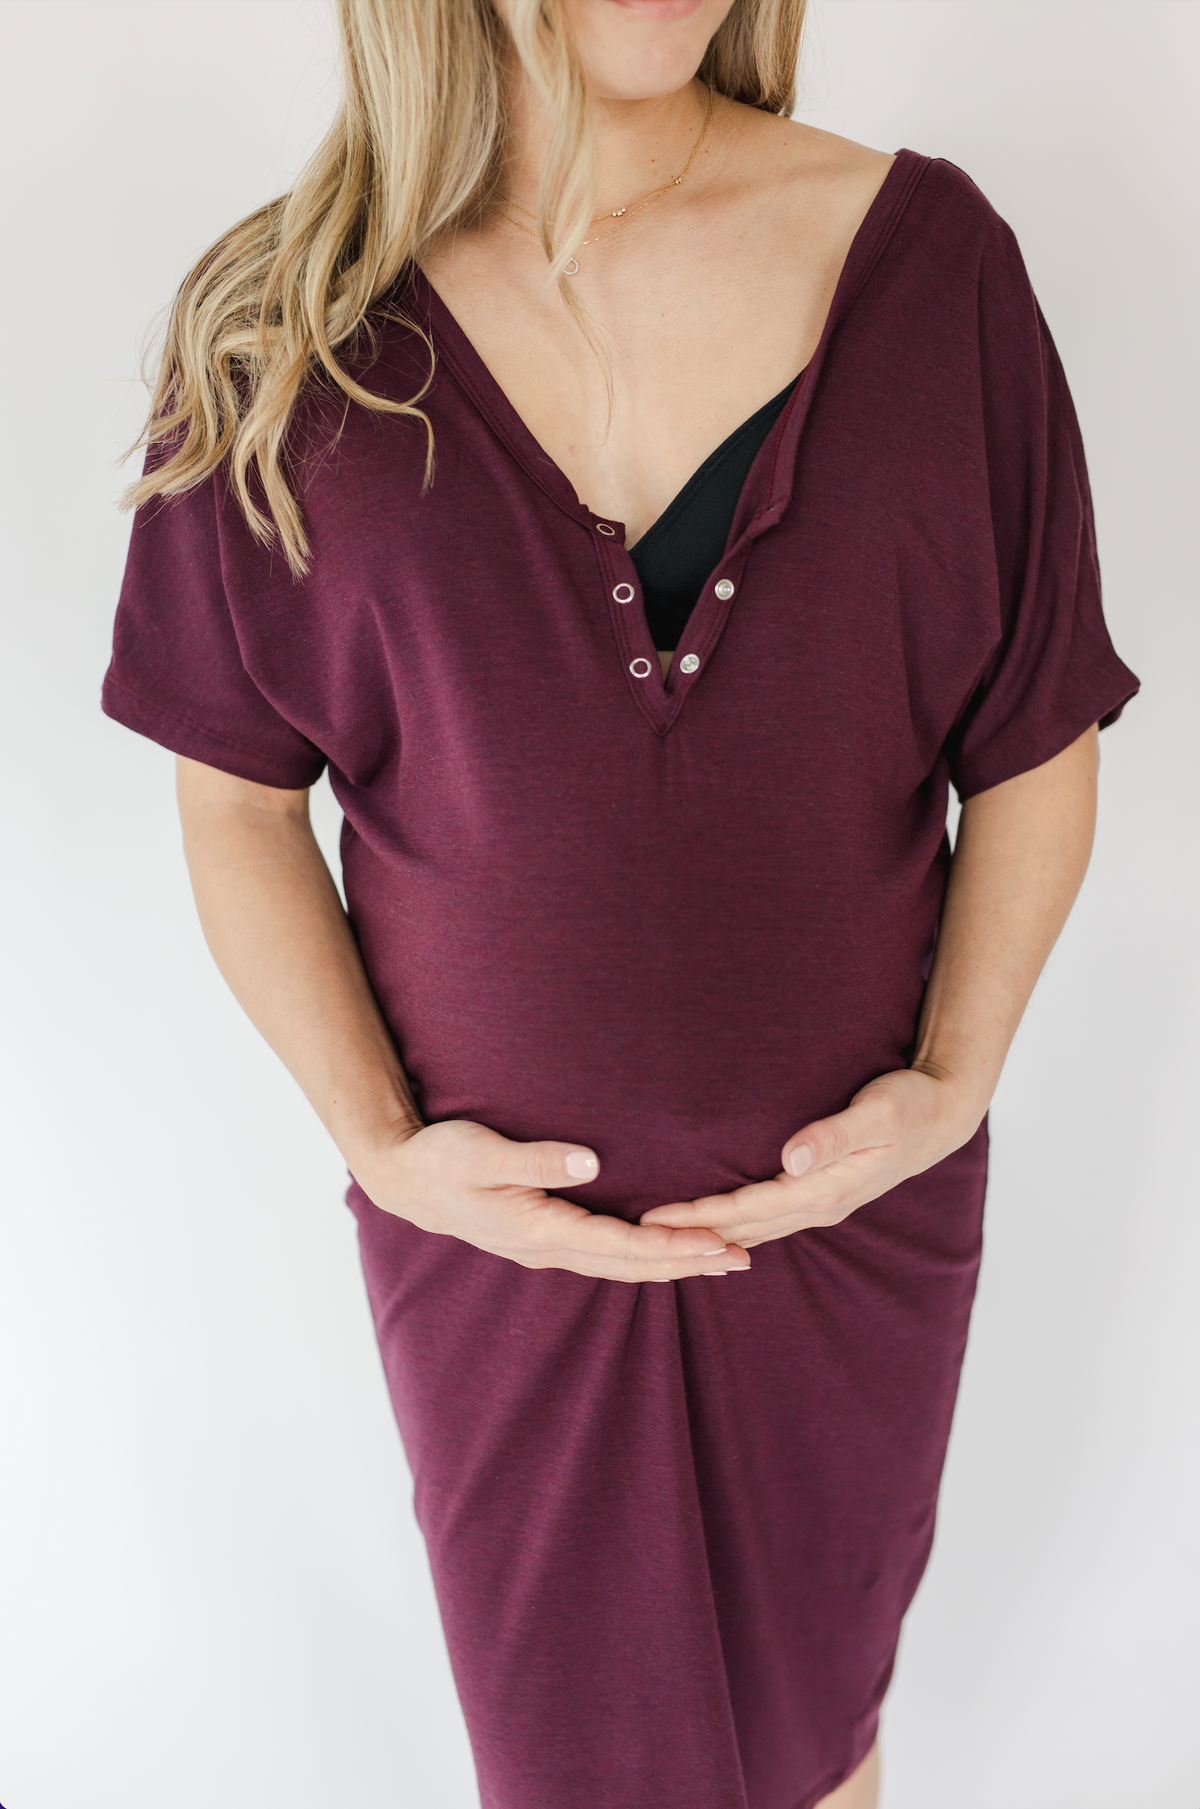 Plum Labour & Delivery Gown – The Fourth